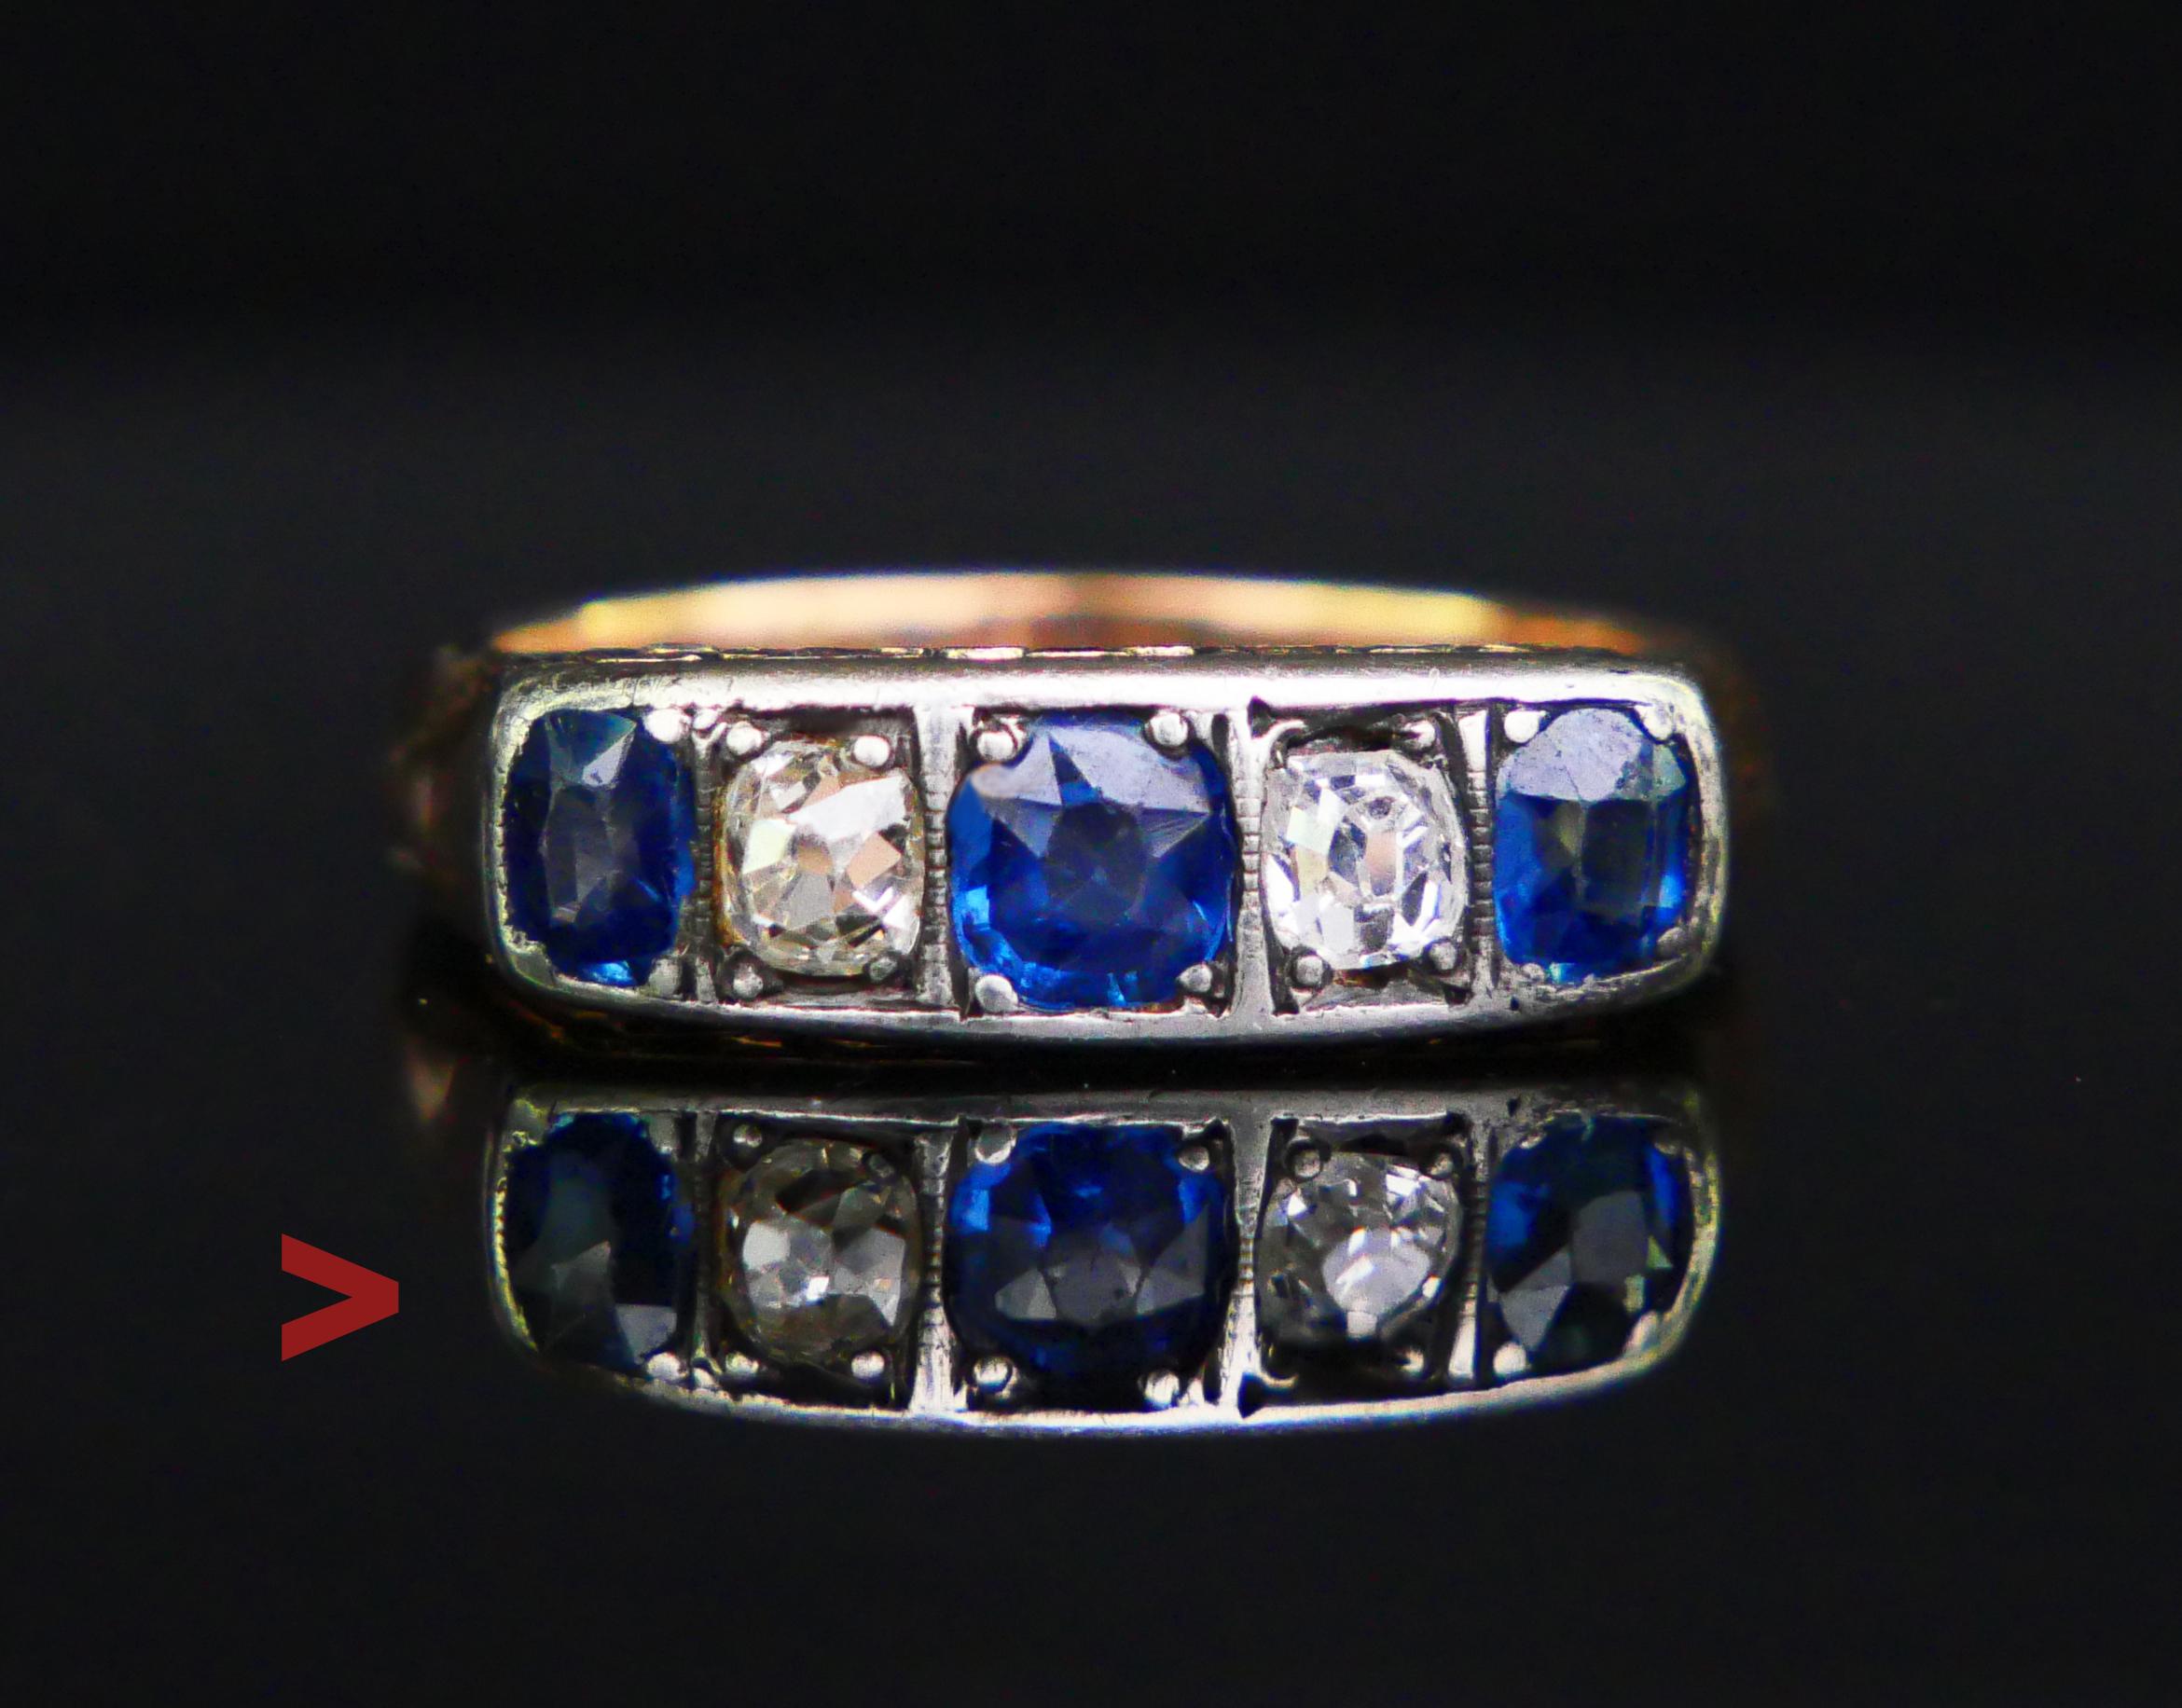 Antique German Alliance ca.1900s - 1930s Ring in solid 14K Orange toned Gold with clusters in 14K White Gold or Silver. Hallmarked 585, metal tested solid 14K Gold

Three natural Sapphires of Medium Blue with a light tint of Green color, all three